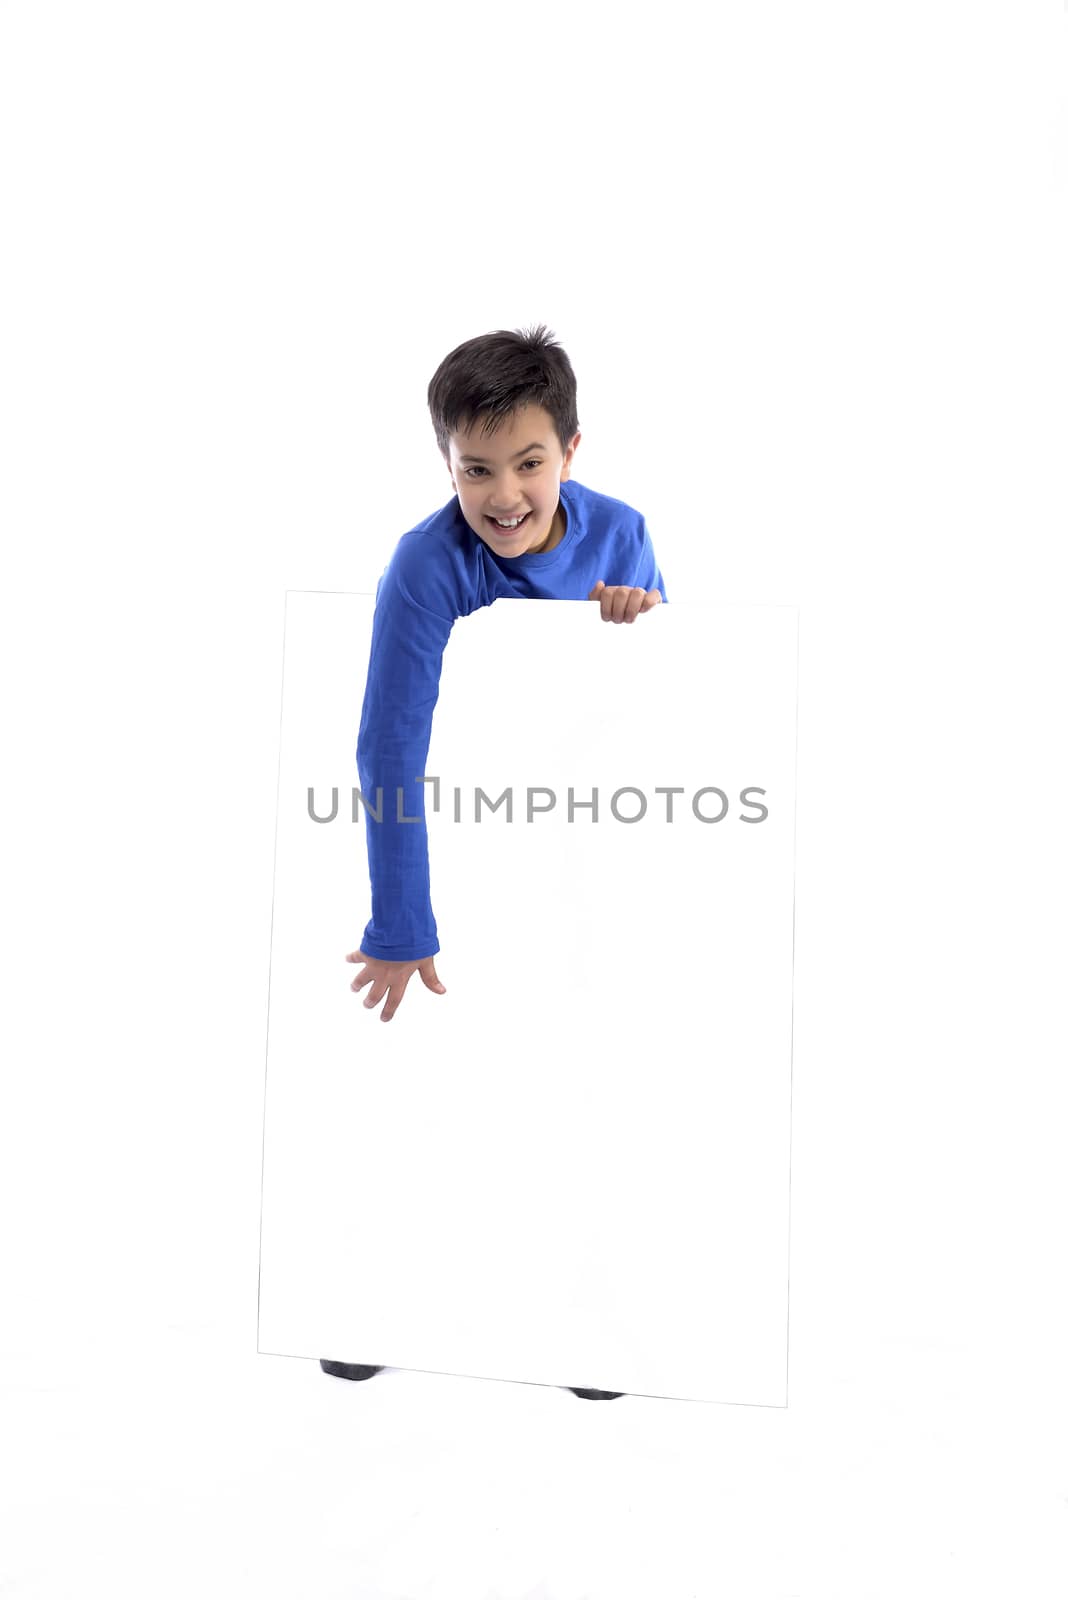 Child Holding White Message Sign by osmar01